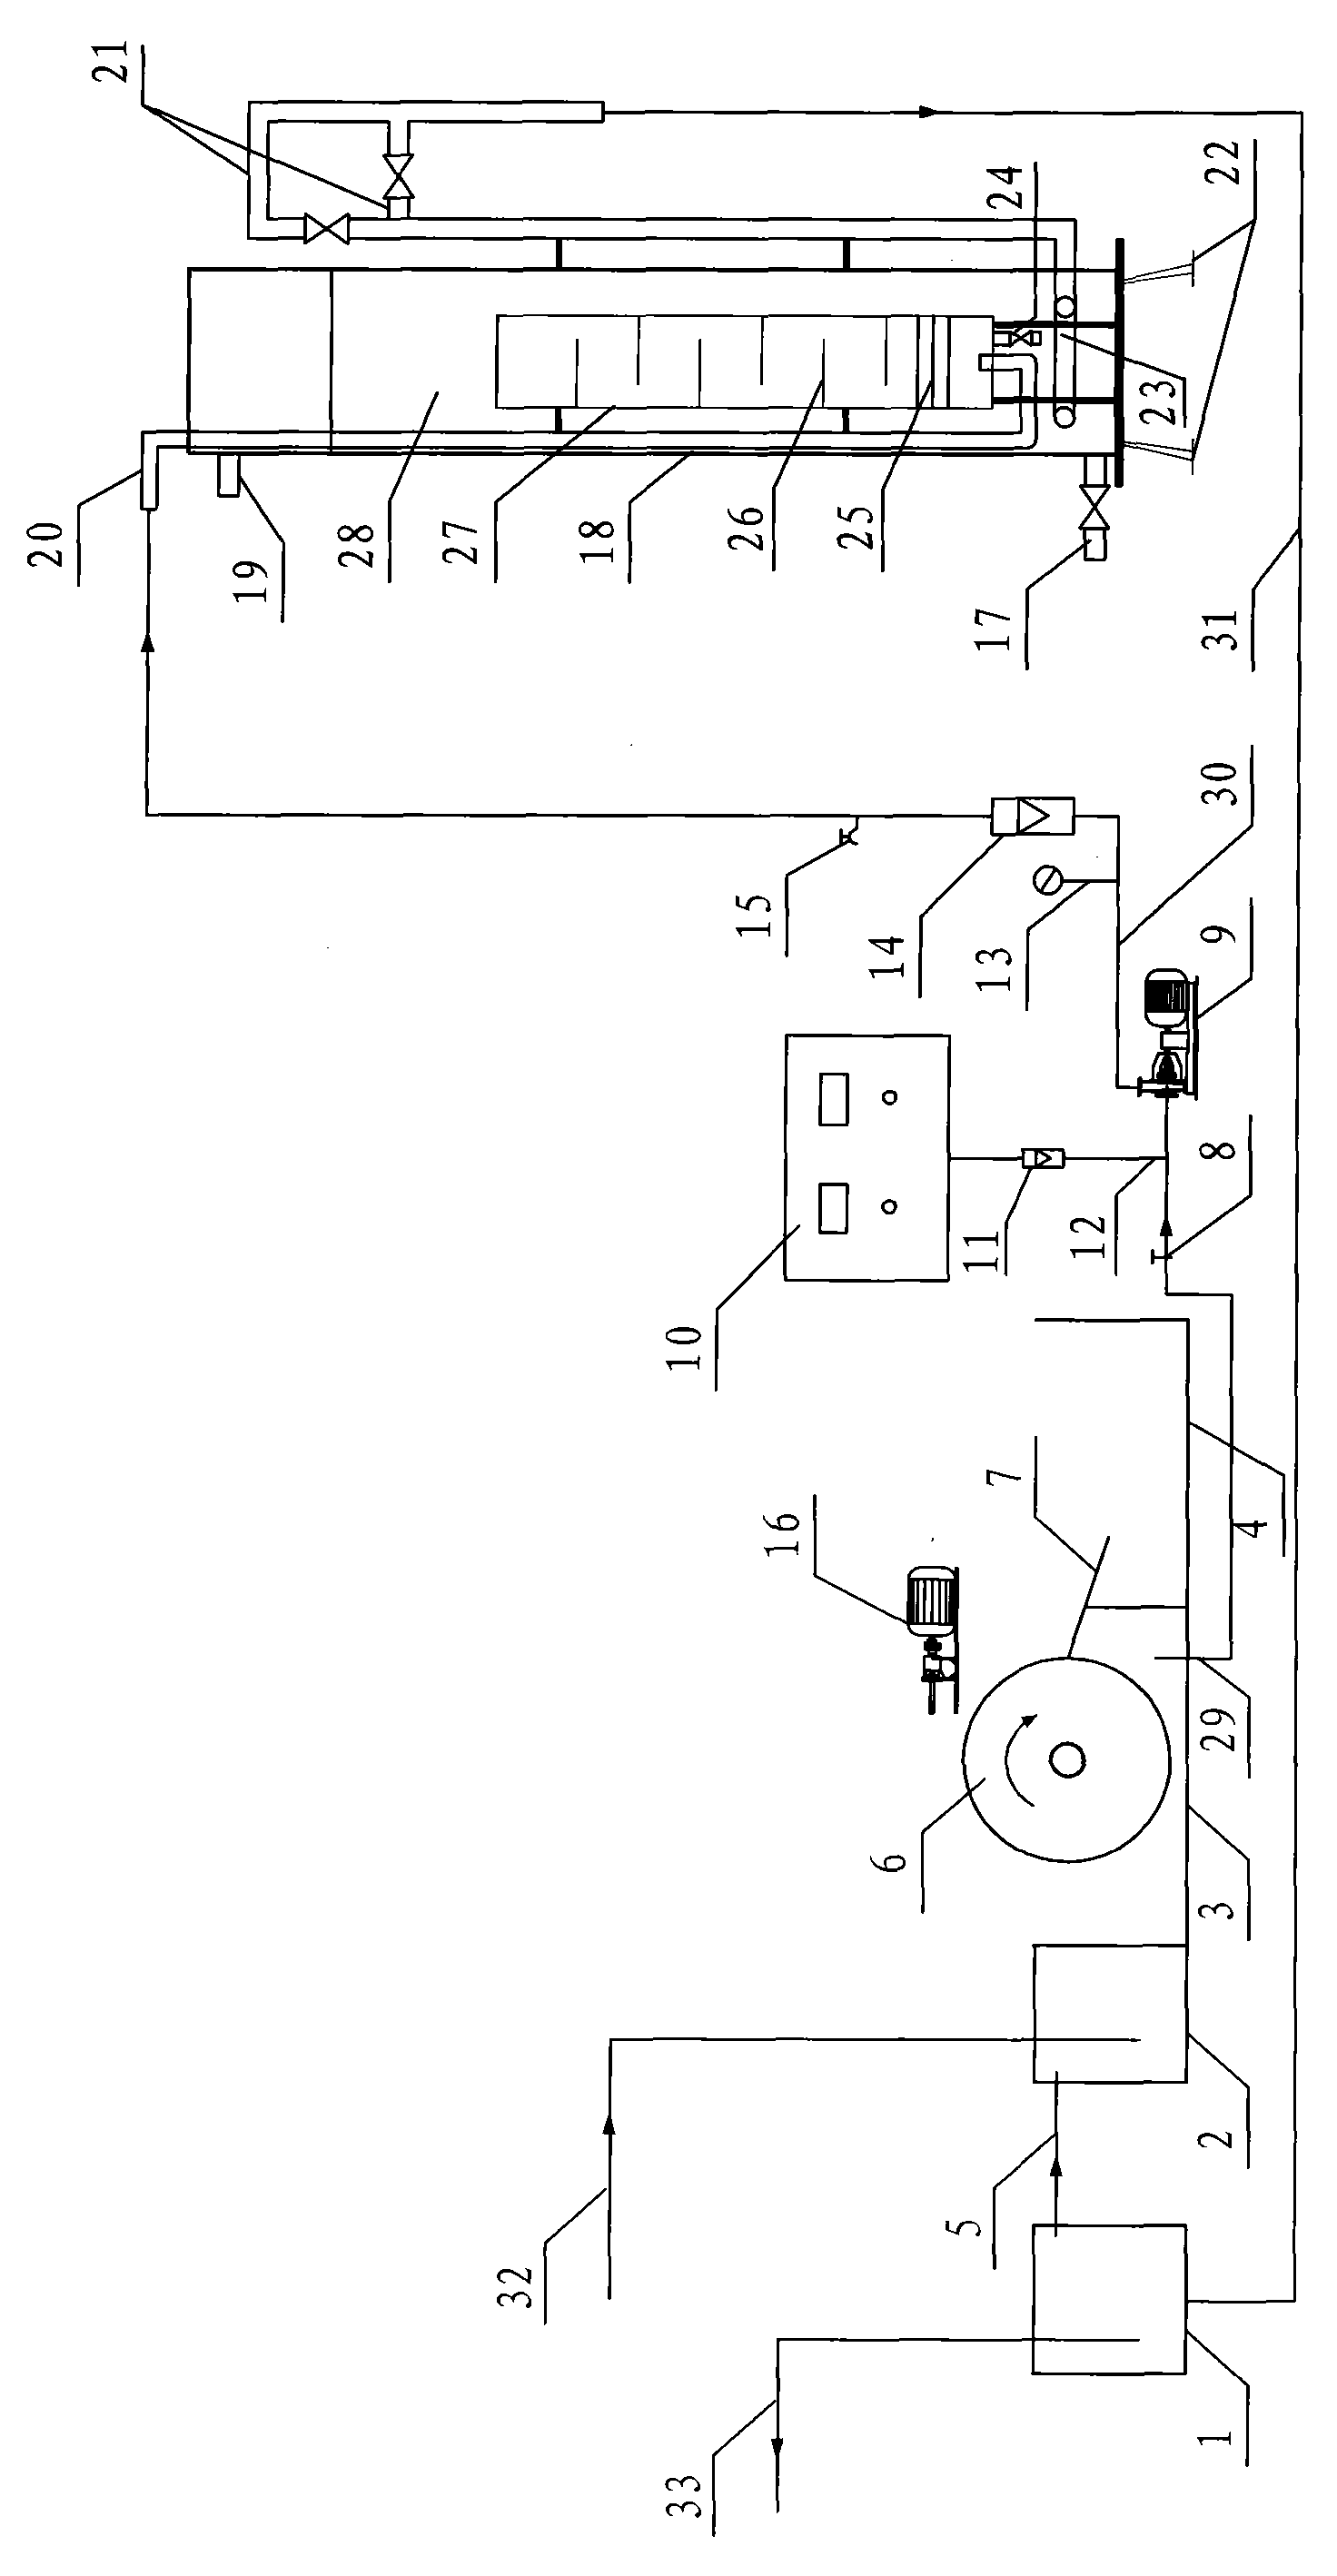 On-line purification equipment for metal machining fluid and purification method thereof